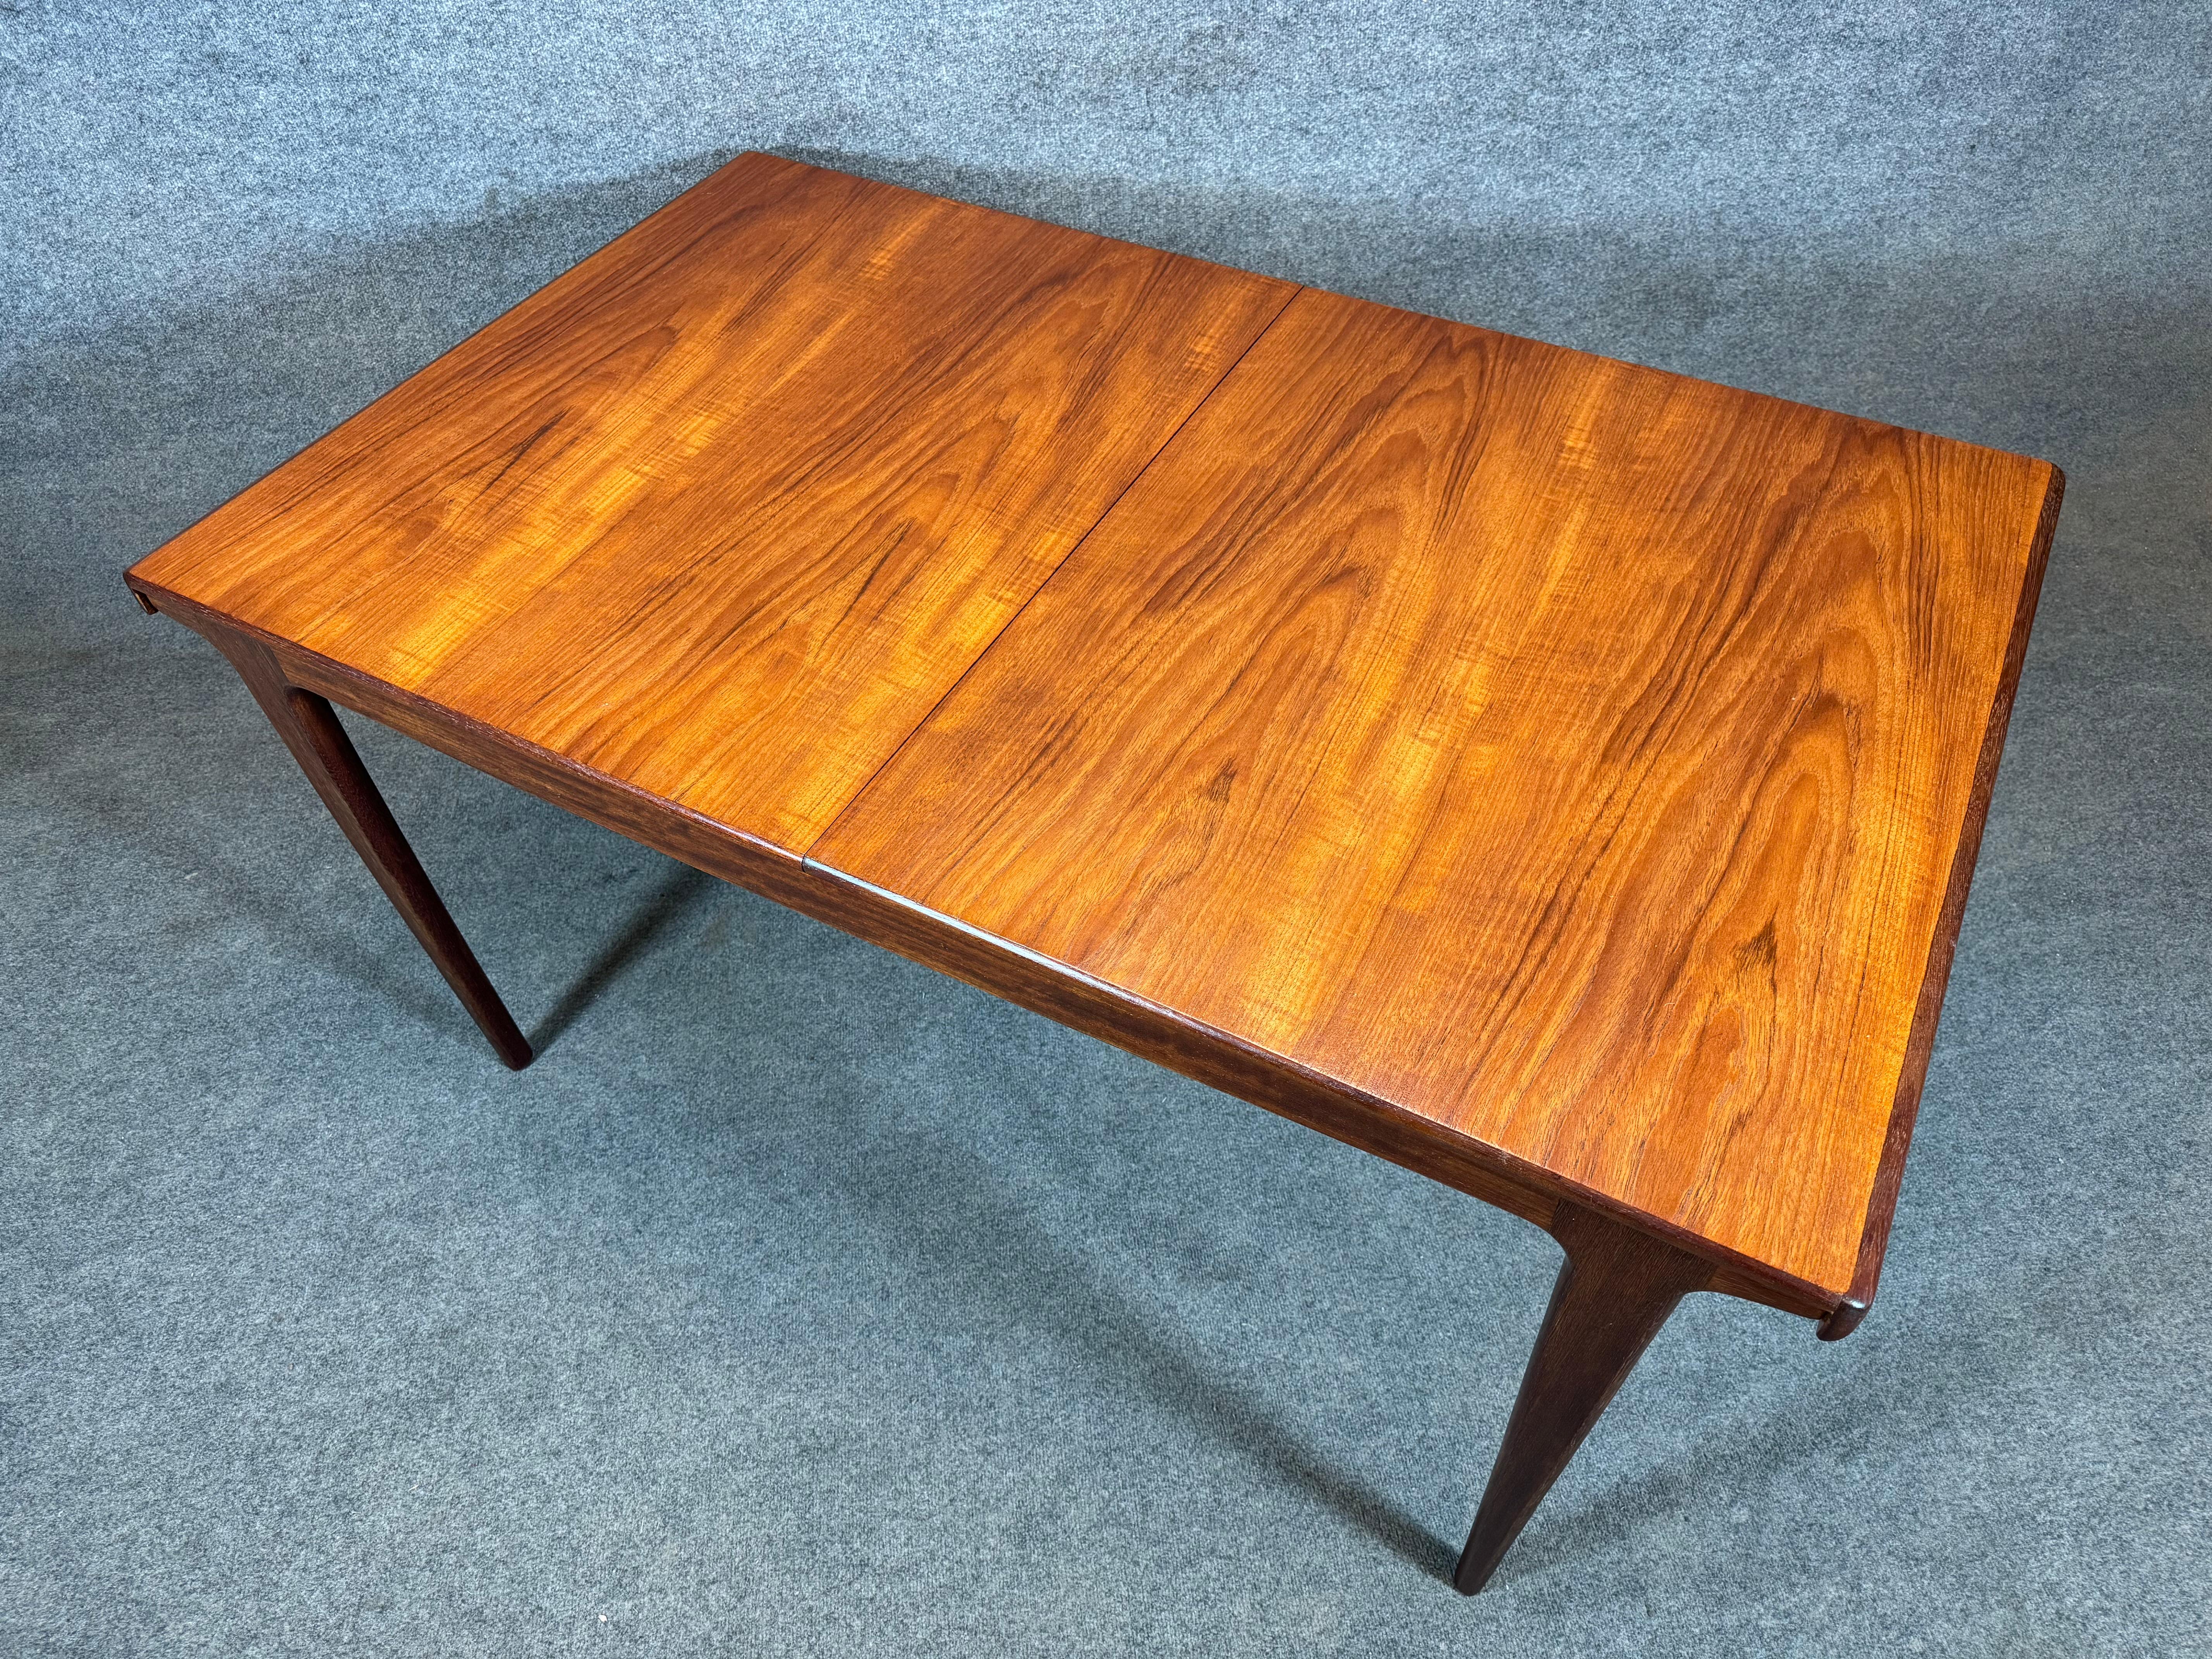 Mid-20th Century Vintage Mid Century Modern Teak Dining Table by John Herbert for A. Younger Ltd. For Sale